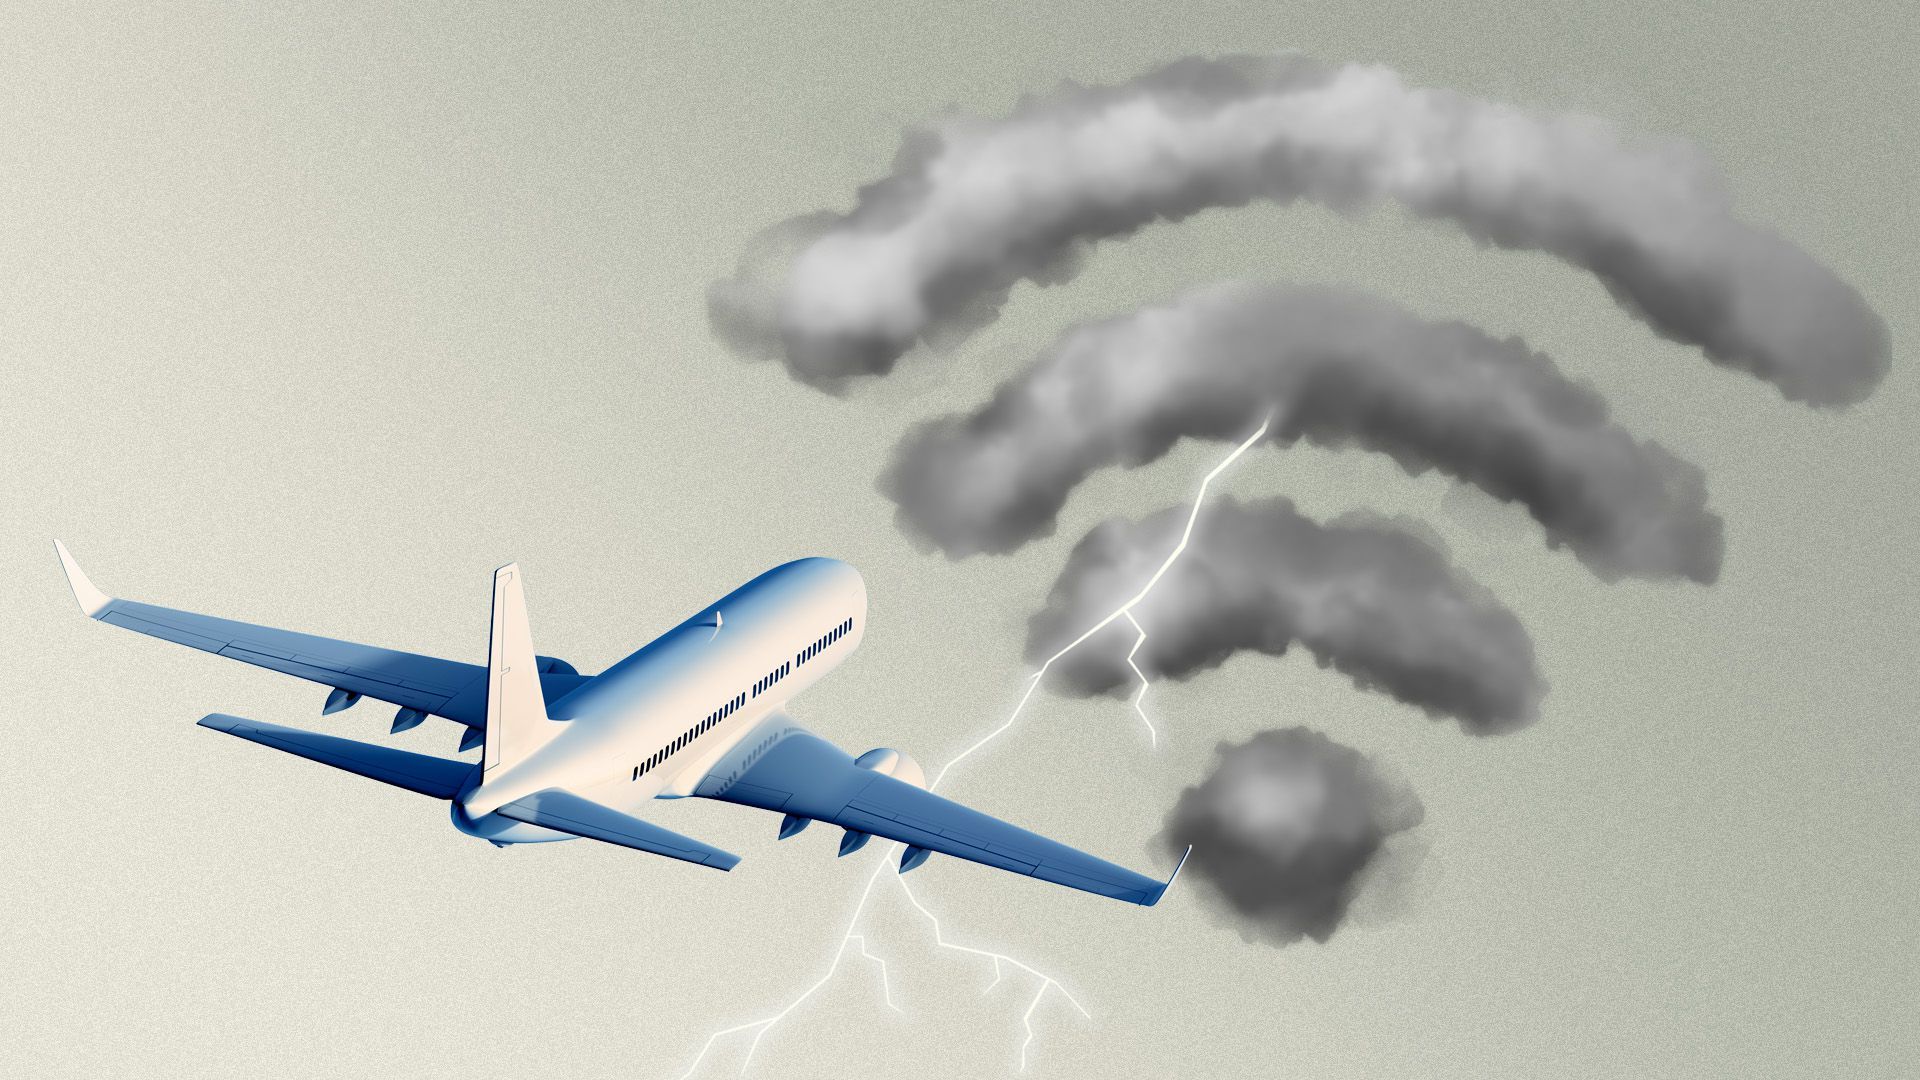 Illustration of an airplane flying into a storm cloud shapes as the wireless symbol